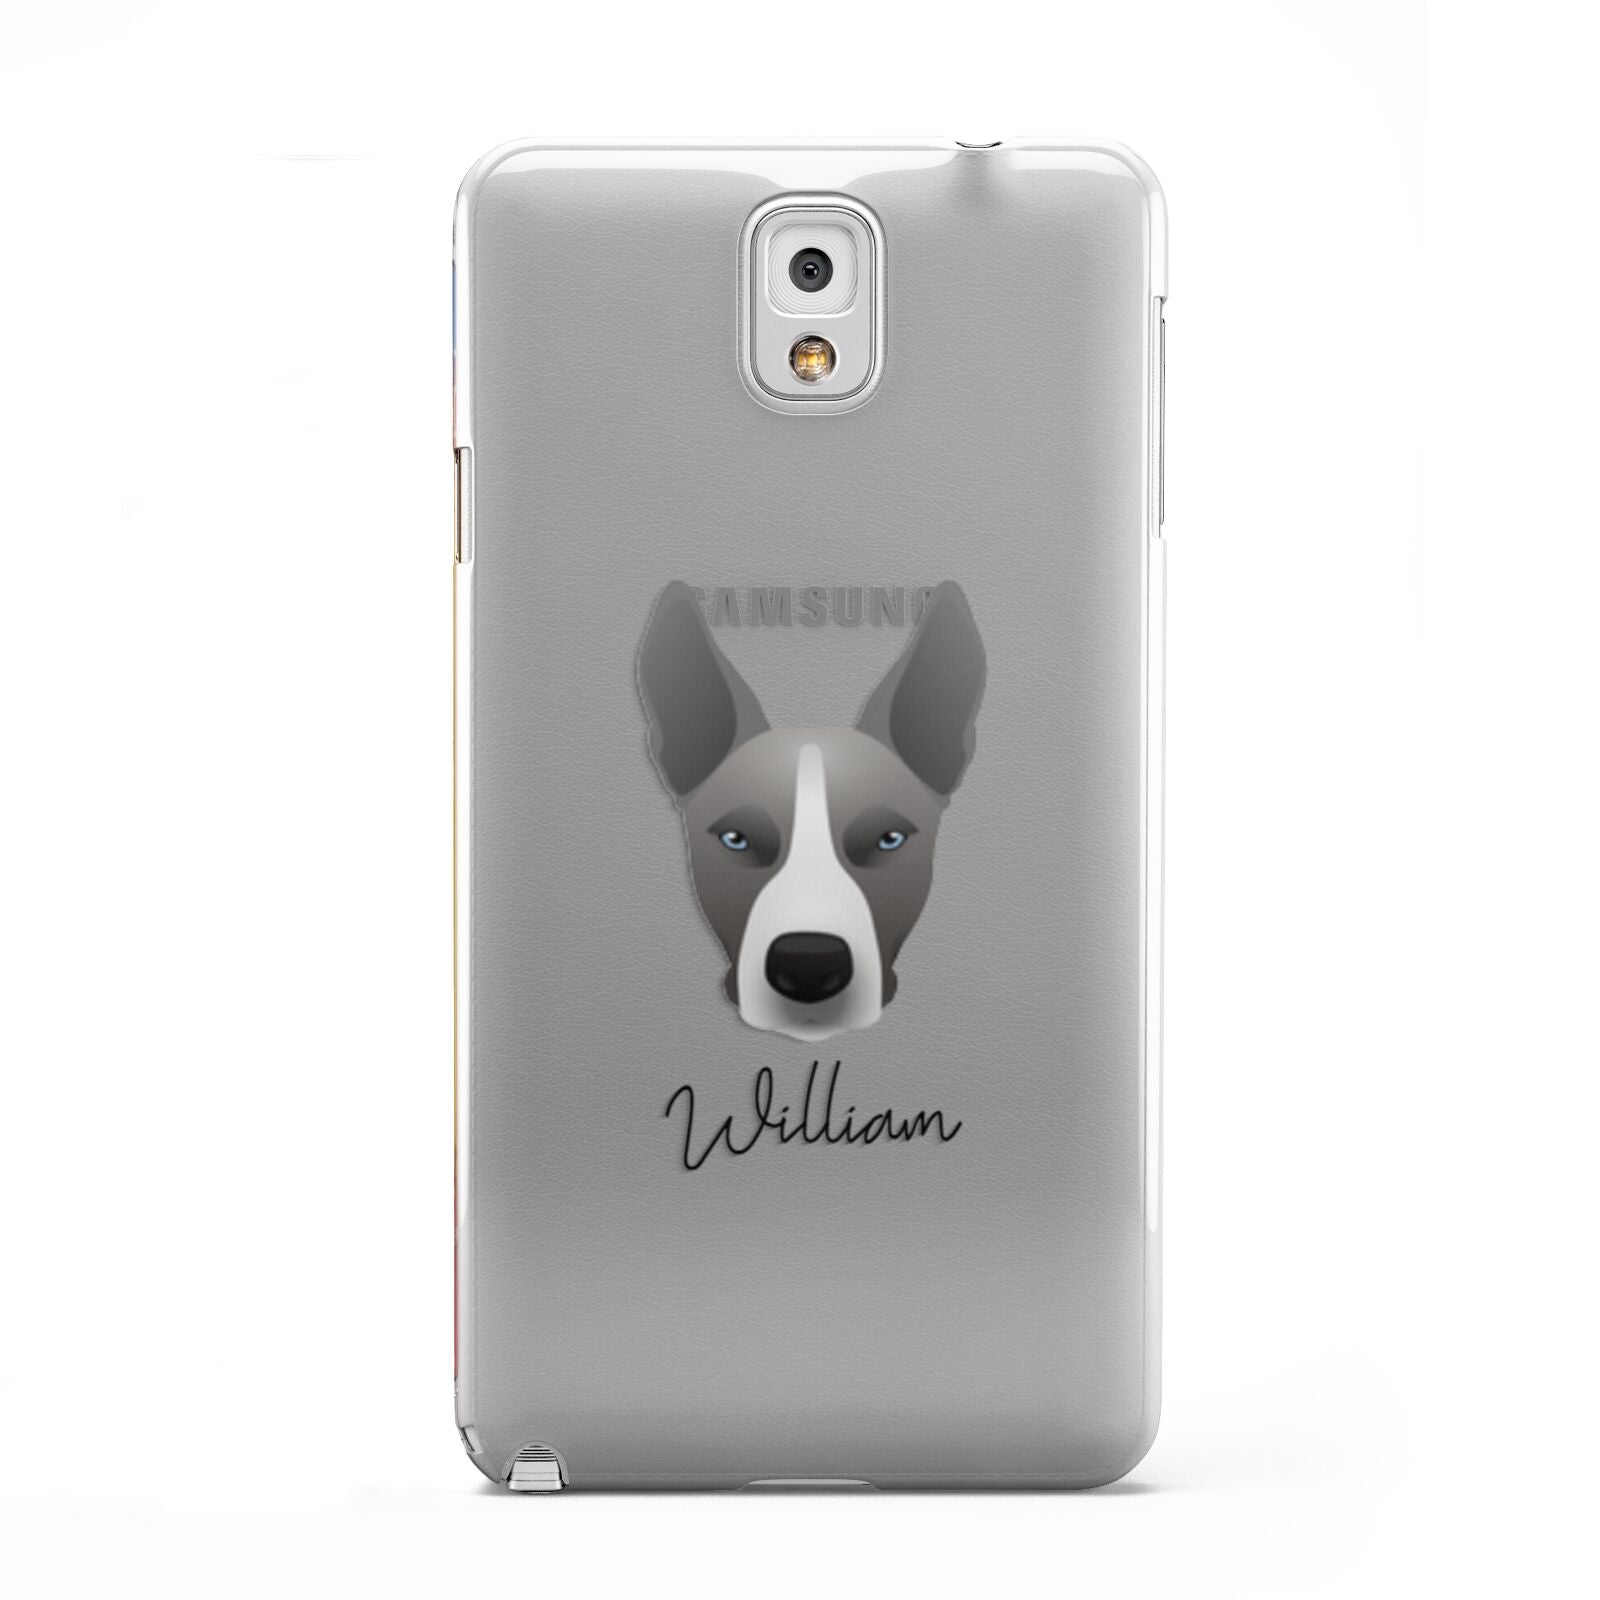 Pitsky Personalised Samsung Galaxy Note 3 Case